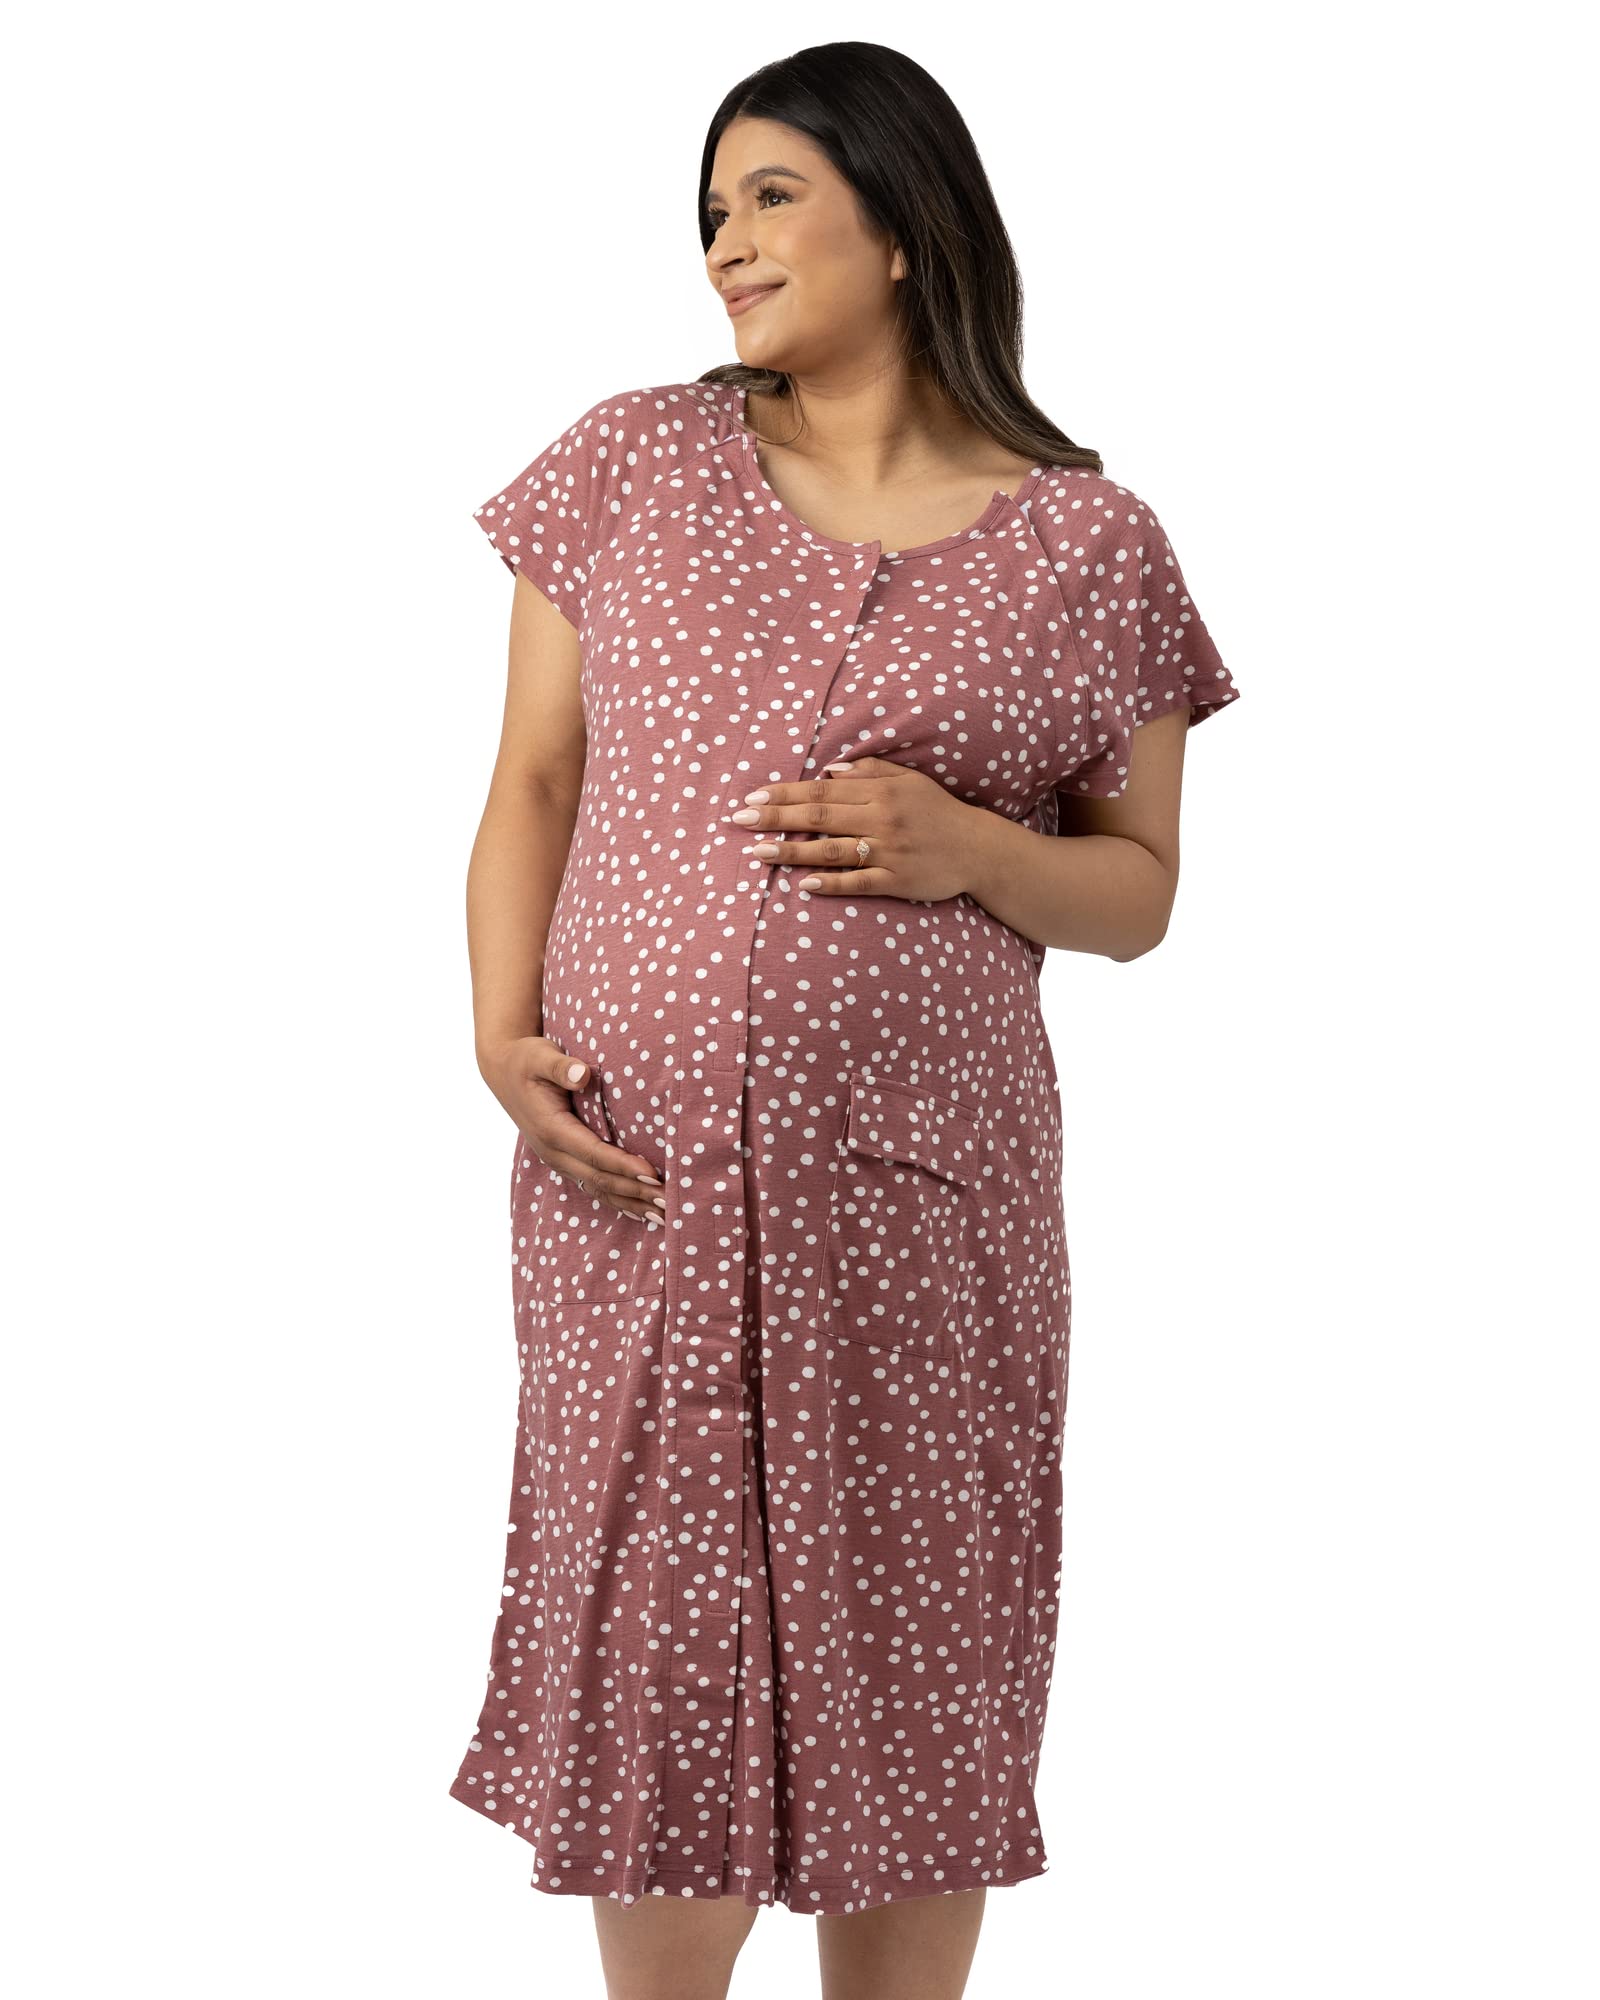 FS13BW4x13_1 Kindred Bravely Universal Labor And Delivery Gown 3 In 1 Labor,  Delivery, Nursing Gown For Hospital (Rosewood Polka Dot, S-M-L)